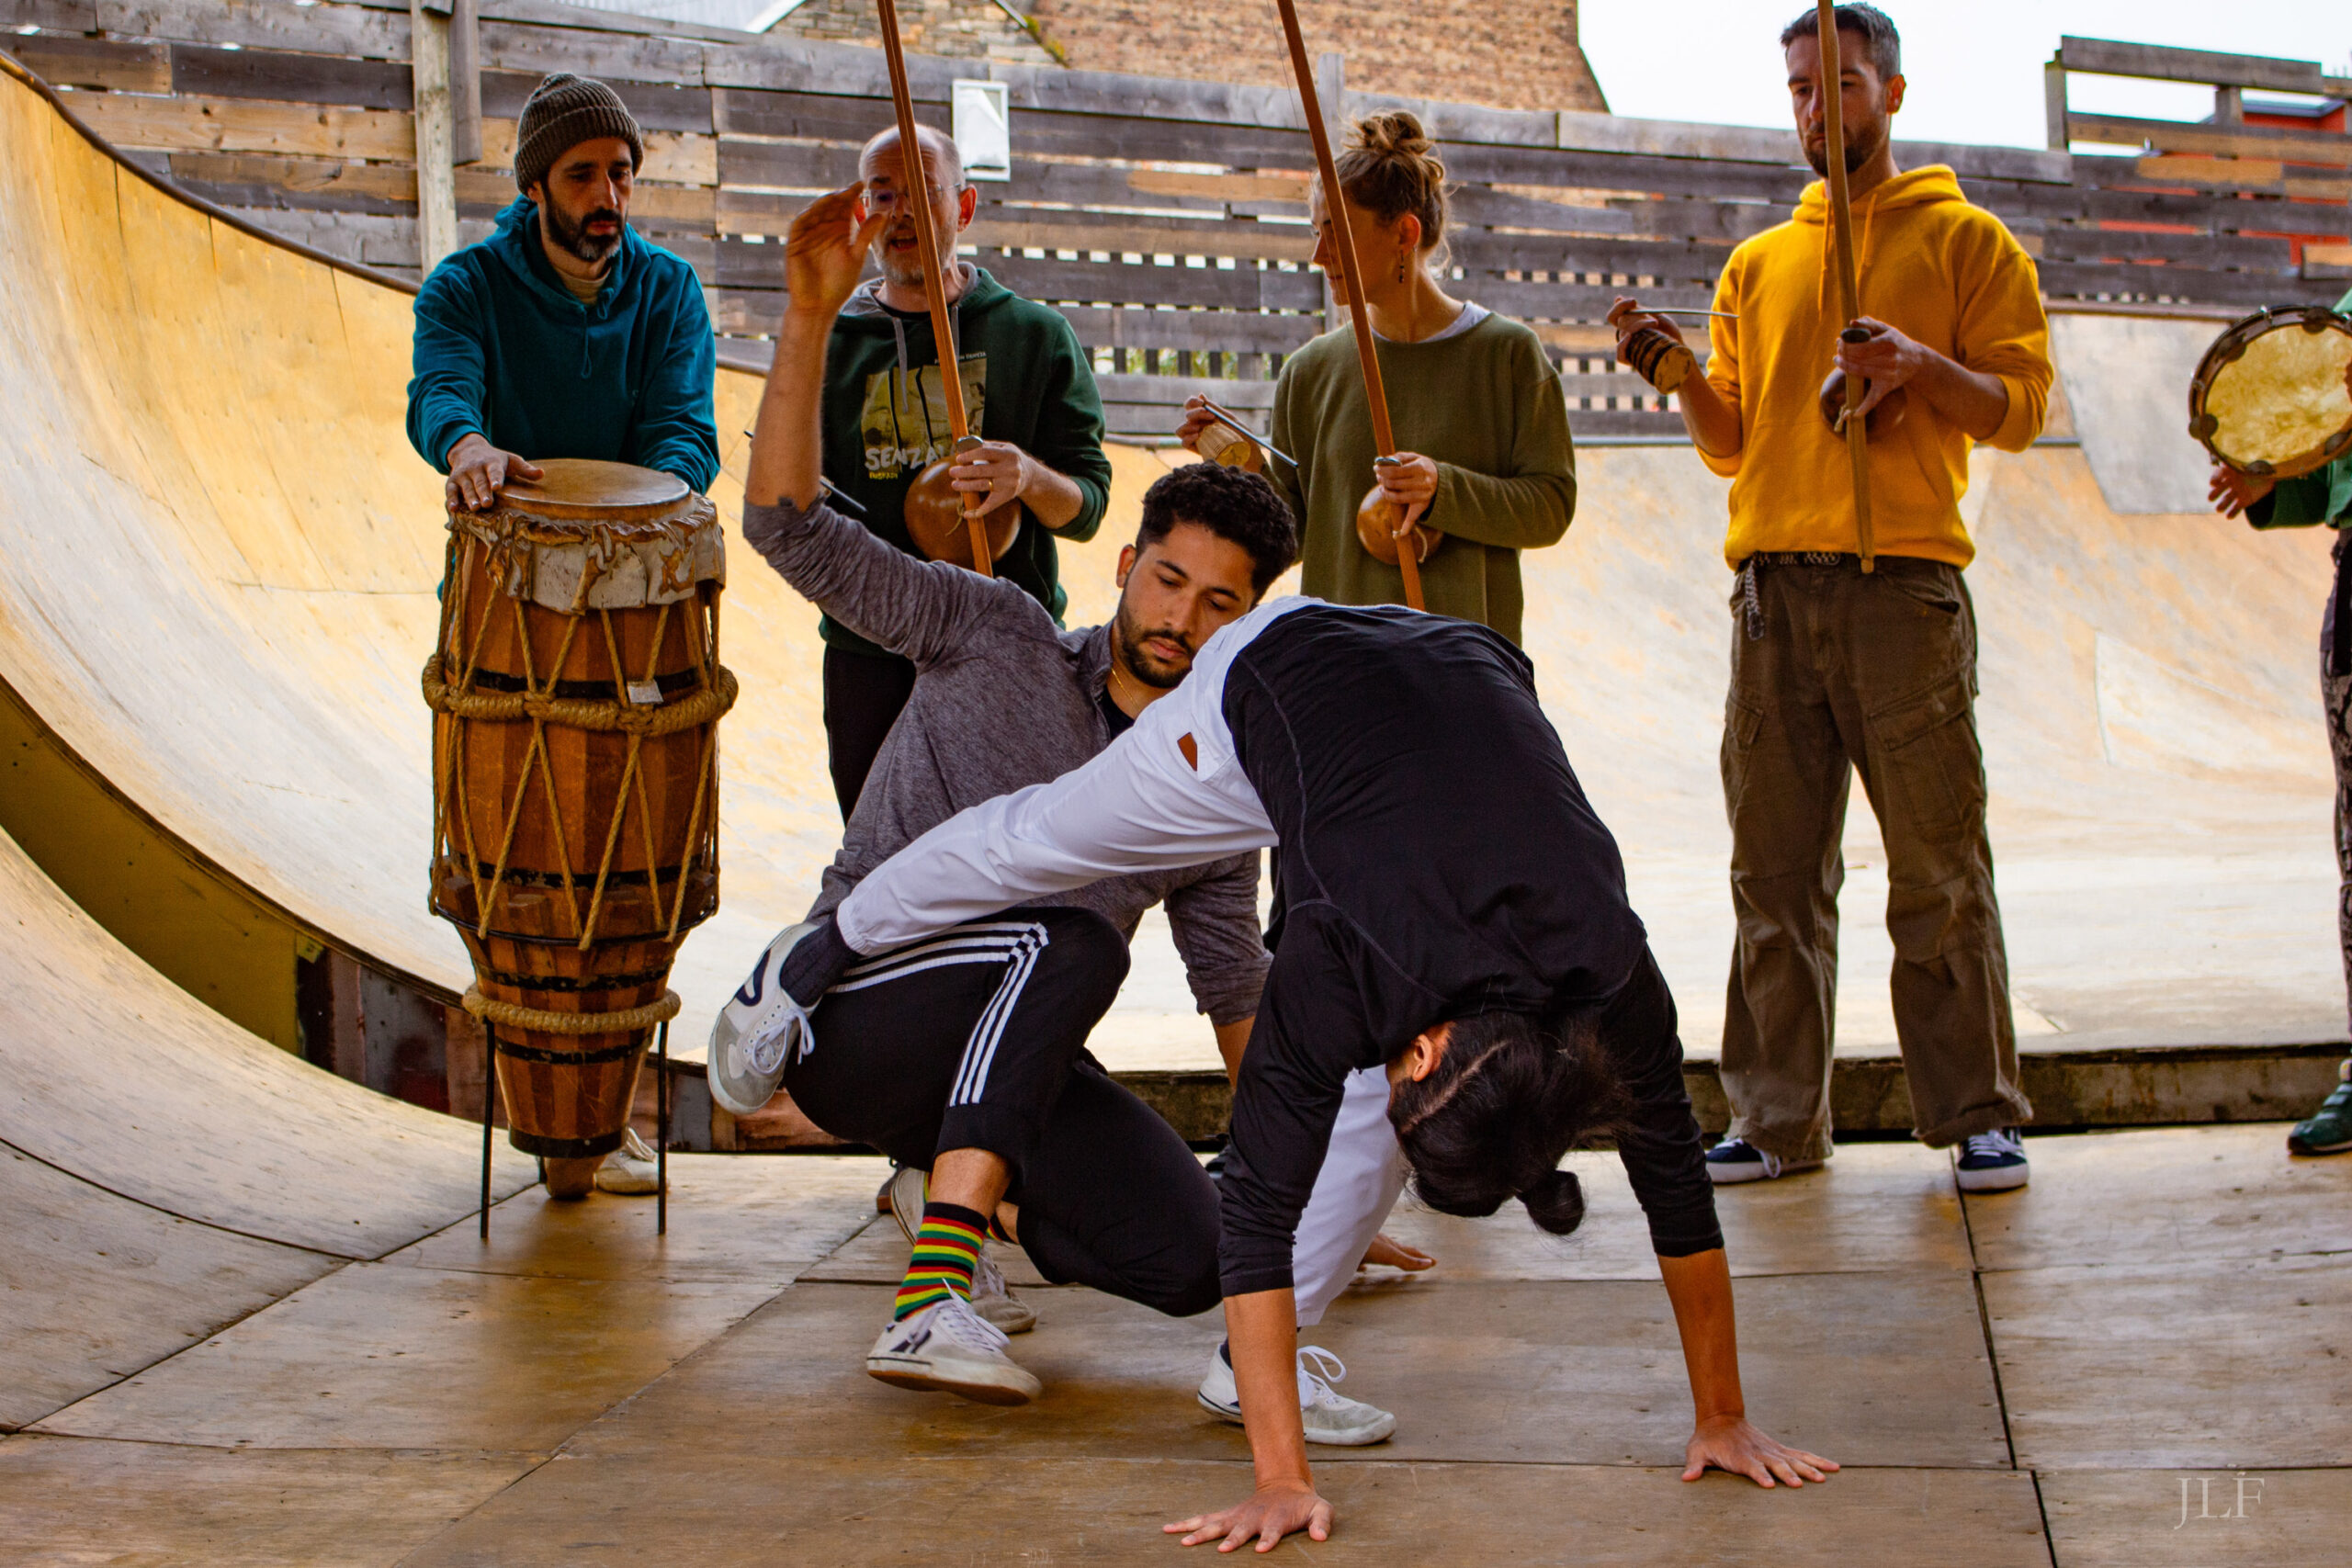 A group of people doing capoeira, 5 persons in a row at the back playing instruments, 2 persons in the foreground dancing.